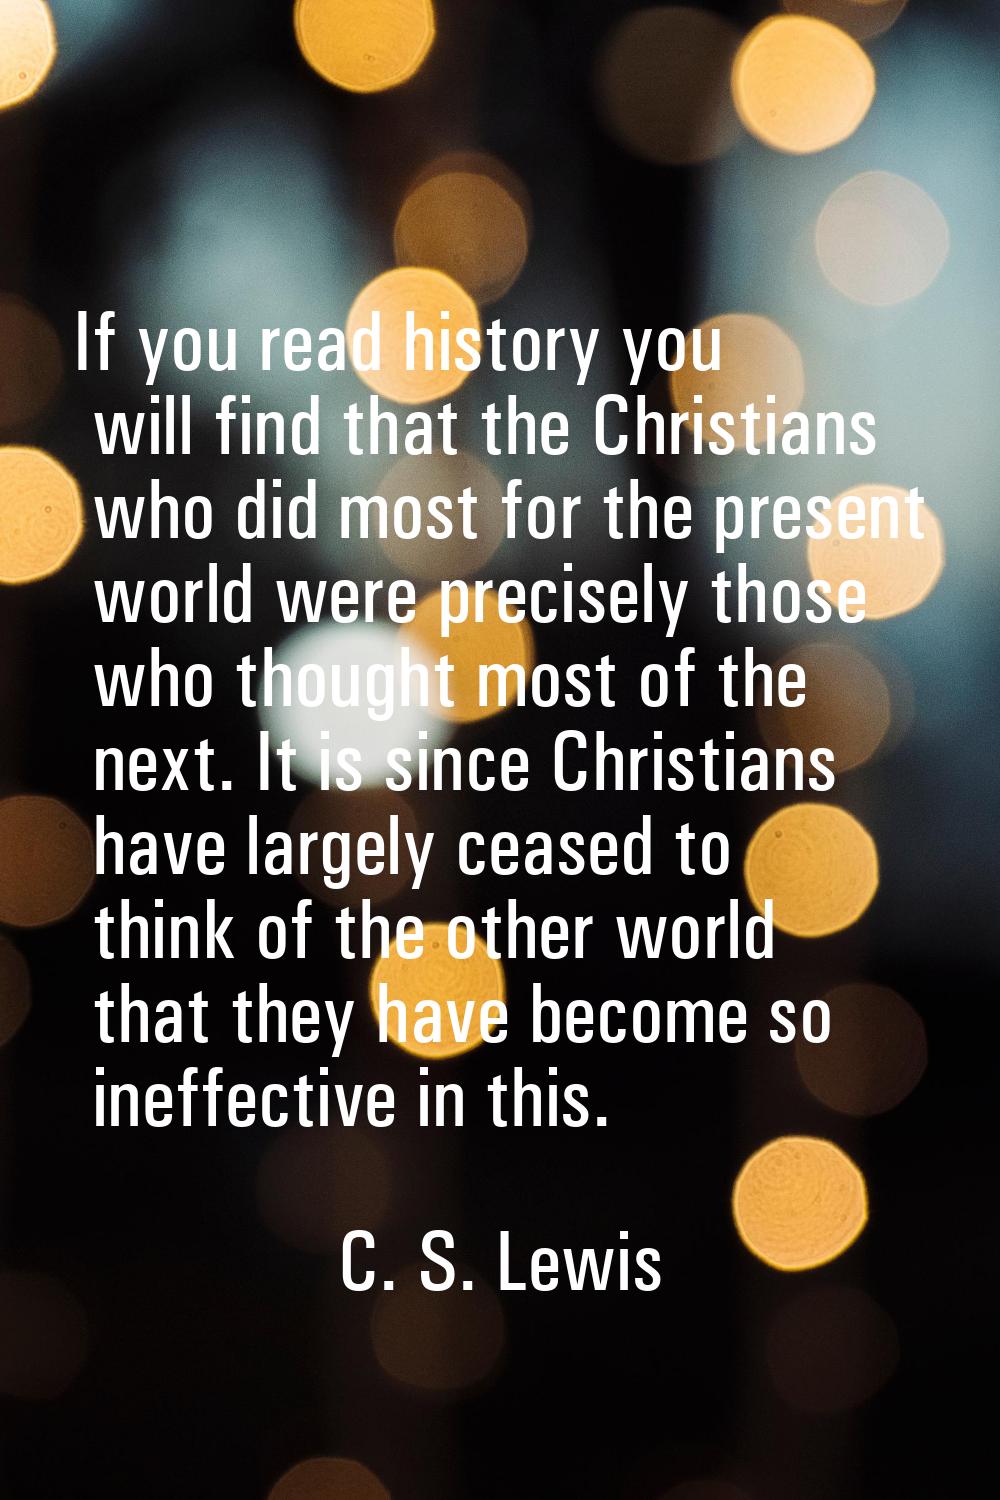 If you read history you will find that the Christians who did most for the present world were preci